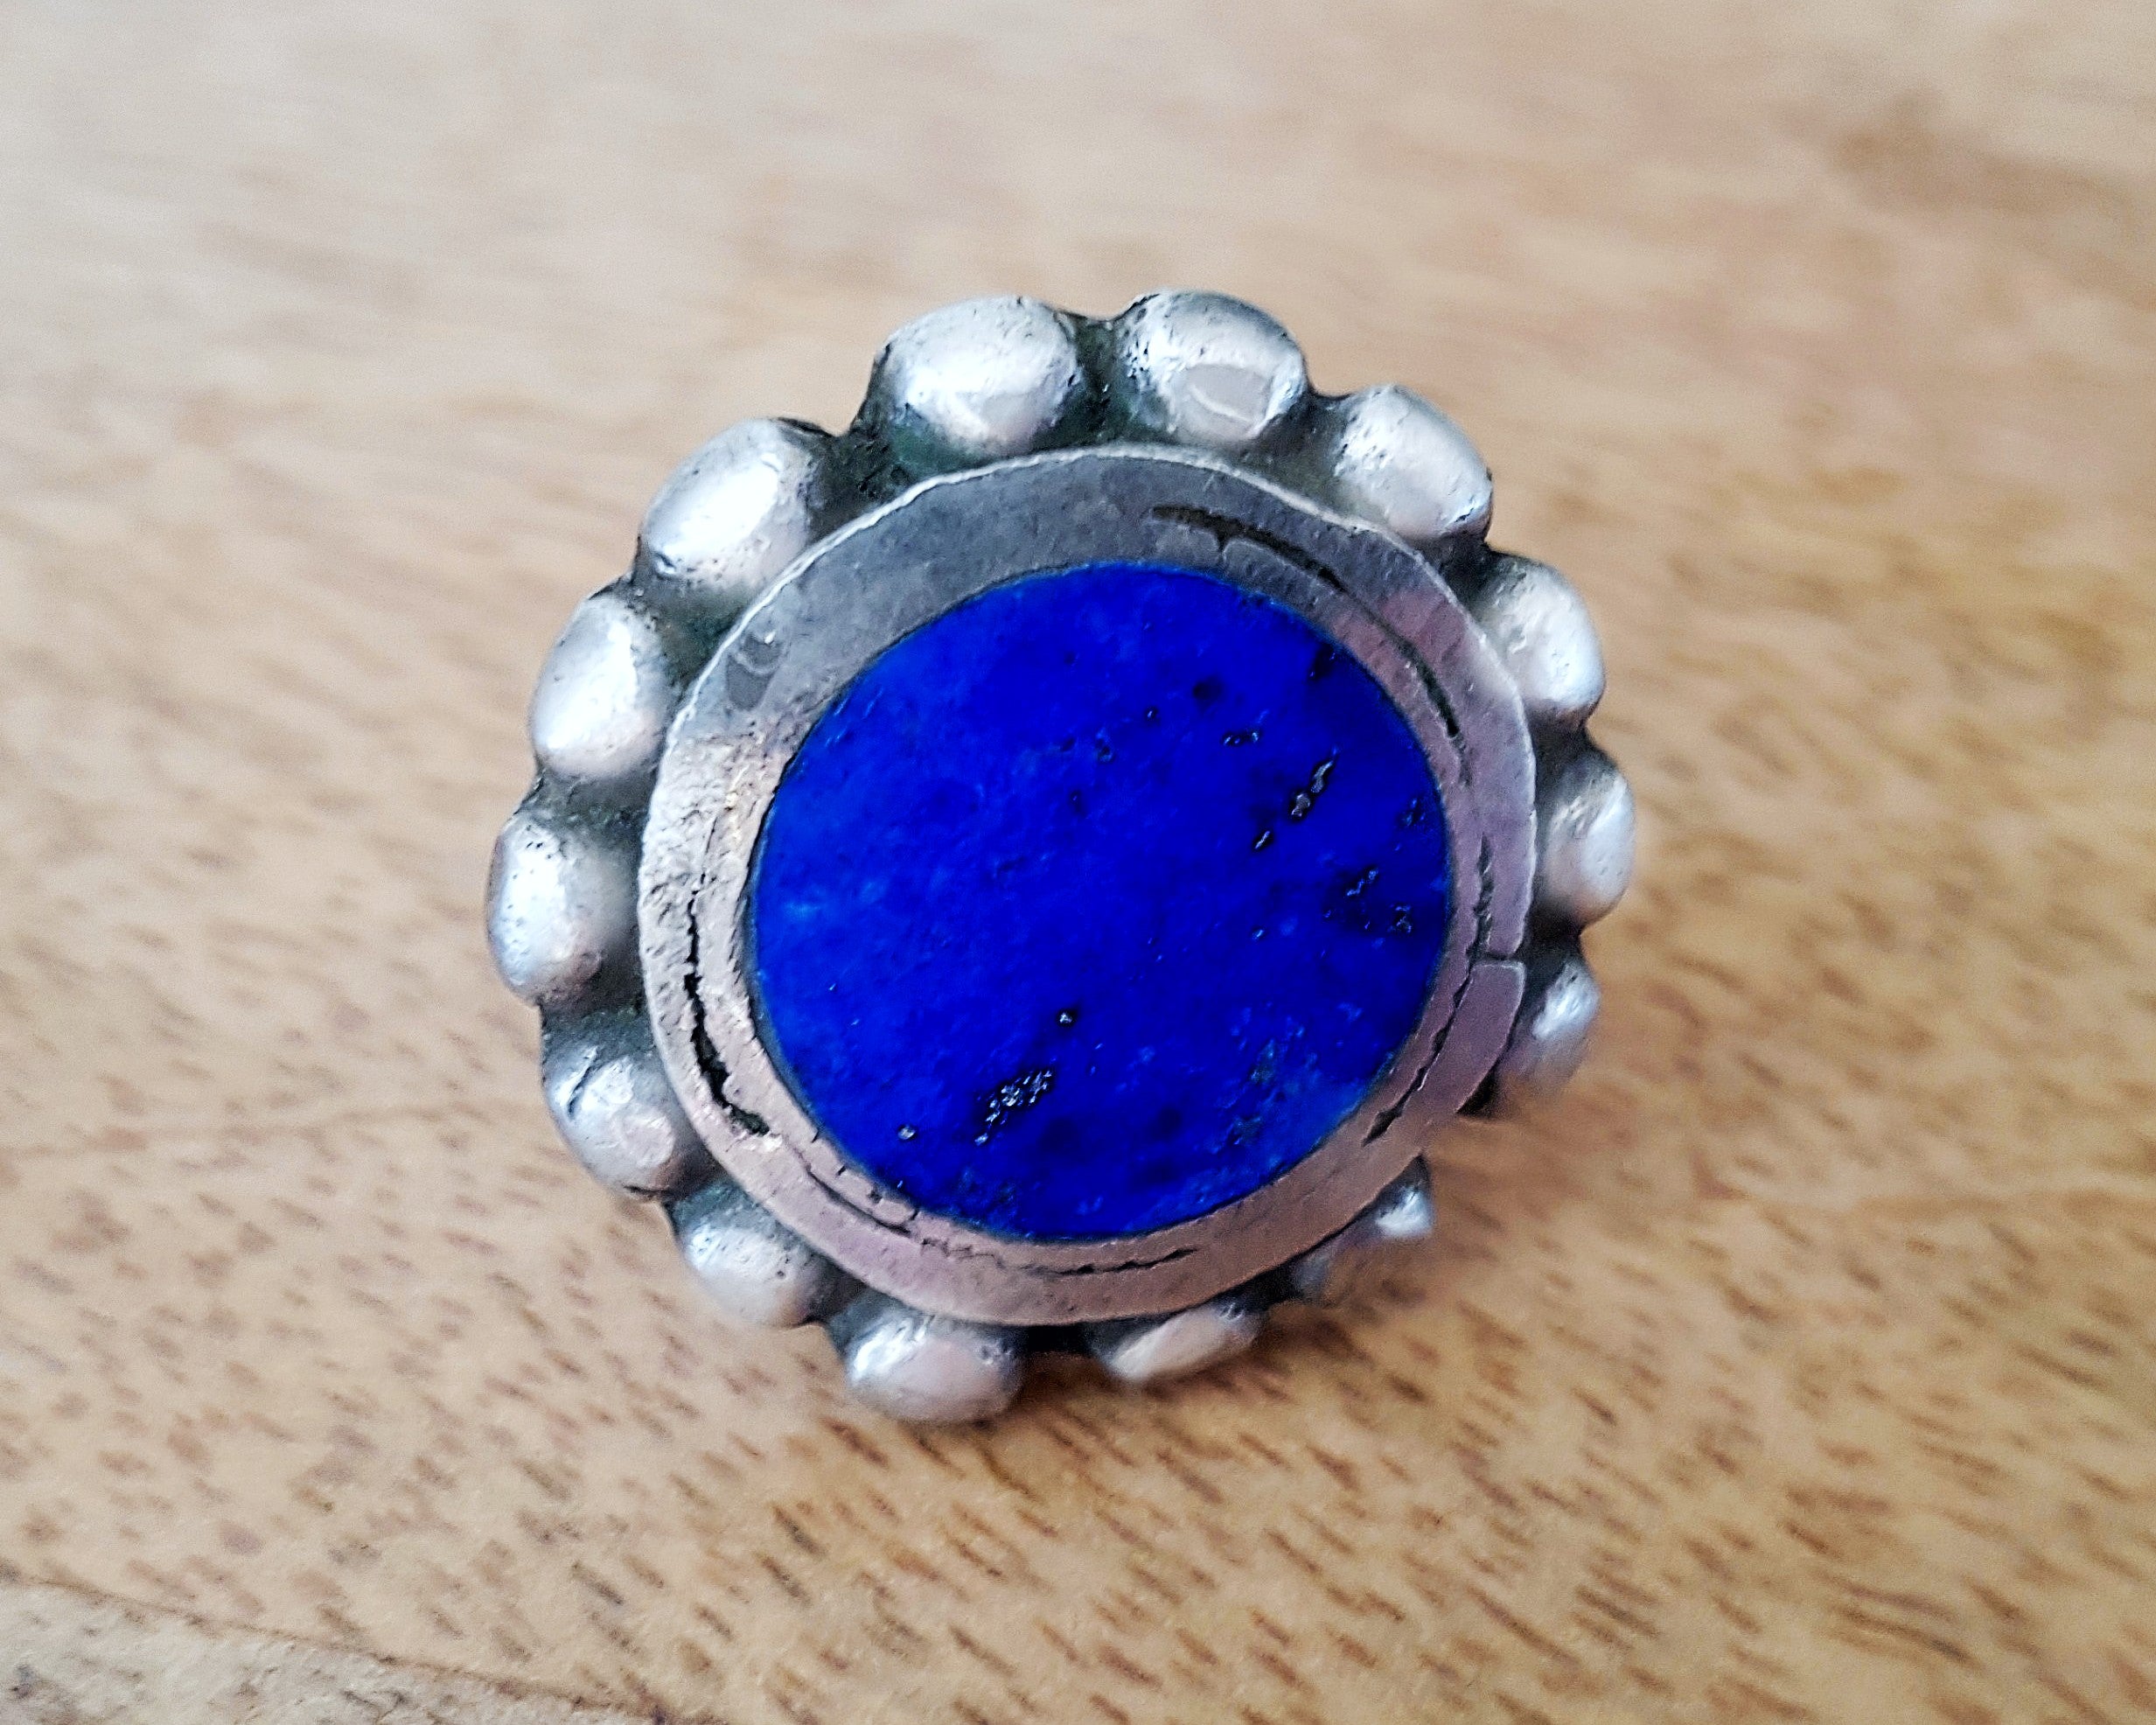 Reserved for B. - Bold Afghani Lapis Lazuli Ring - Size 6.75